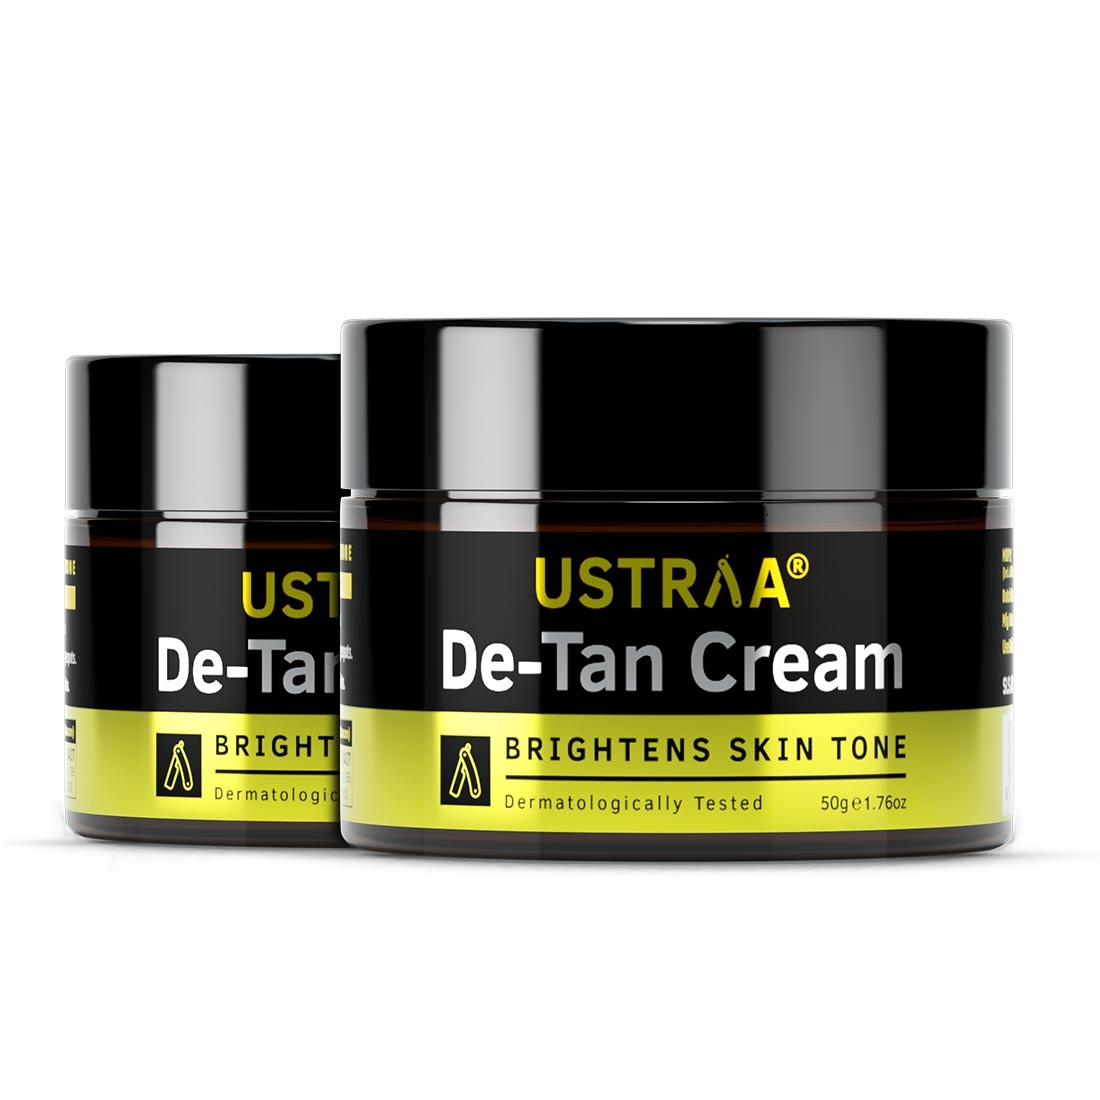 Ustraa | USTRAA De-Tan Cream for Men - 50g - For Men - Tan removal and Even Skin tone, WITHOUT BLEACH, No sulphate, No Paraben, Prevents Dark Spots, With Japanese Yuzu and Liquorice